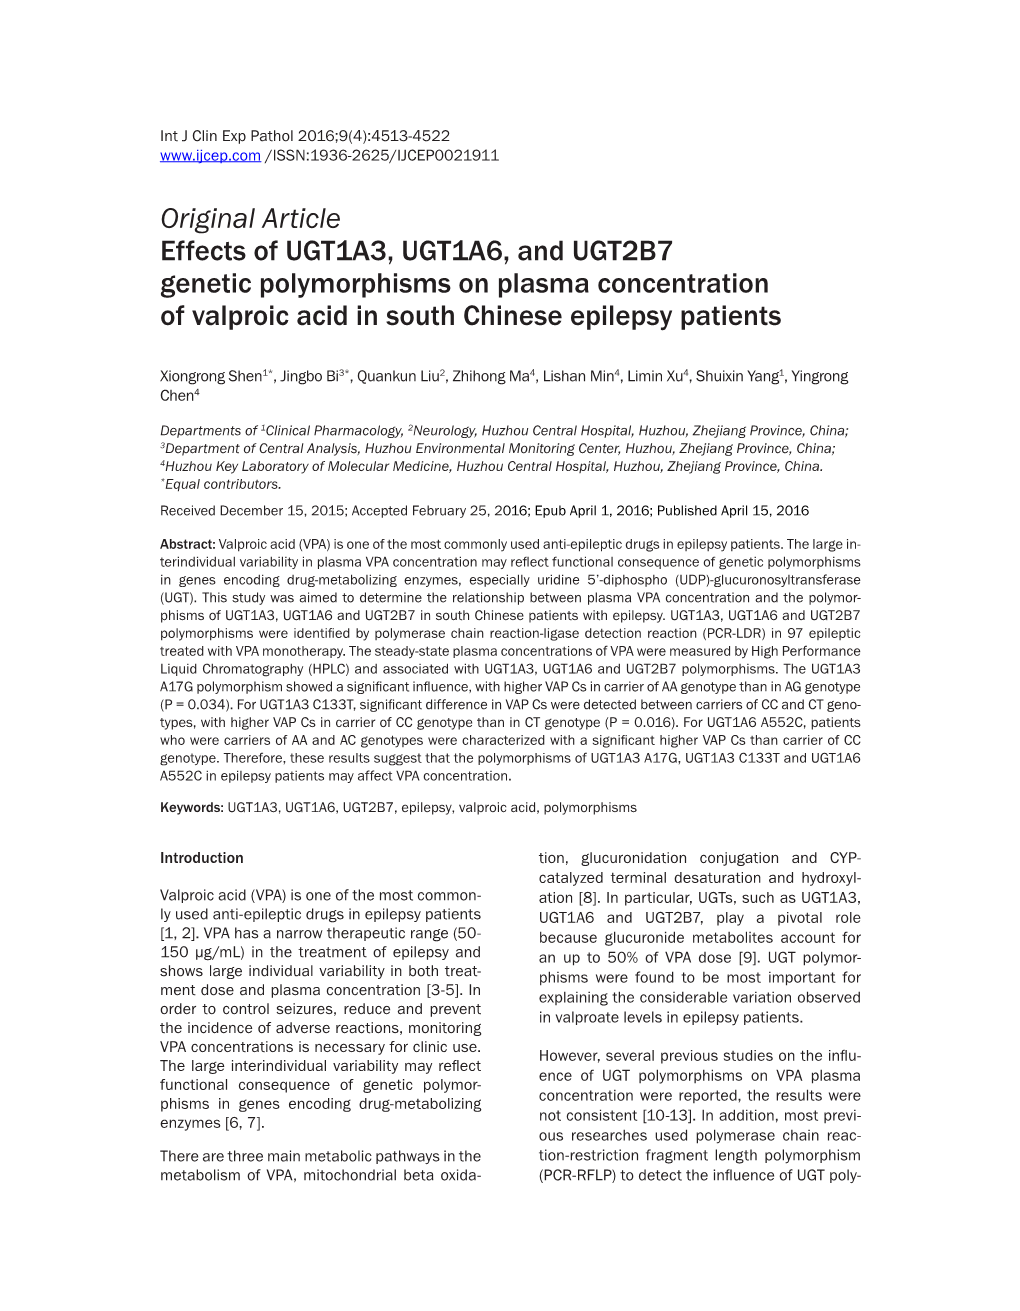 Original Article Effects of UGT1A3, UGT1A6, and UGT2B7 Genetic Polymorphisms on Plasma Concentration of Valproic Acid in South Chinese Epilepsy Patients